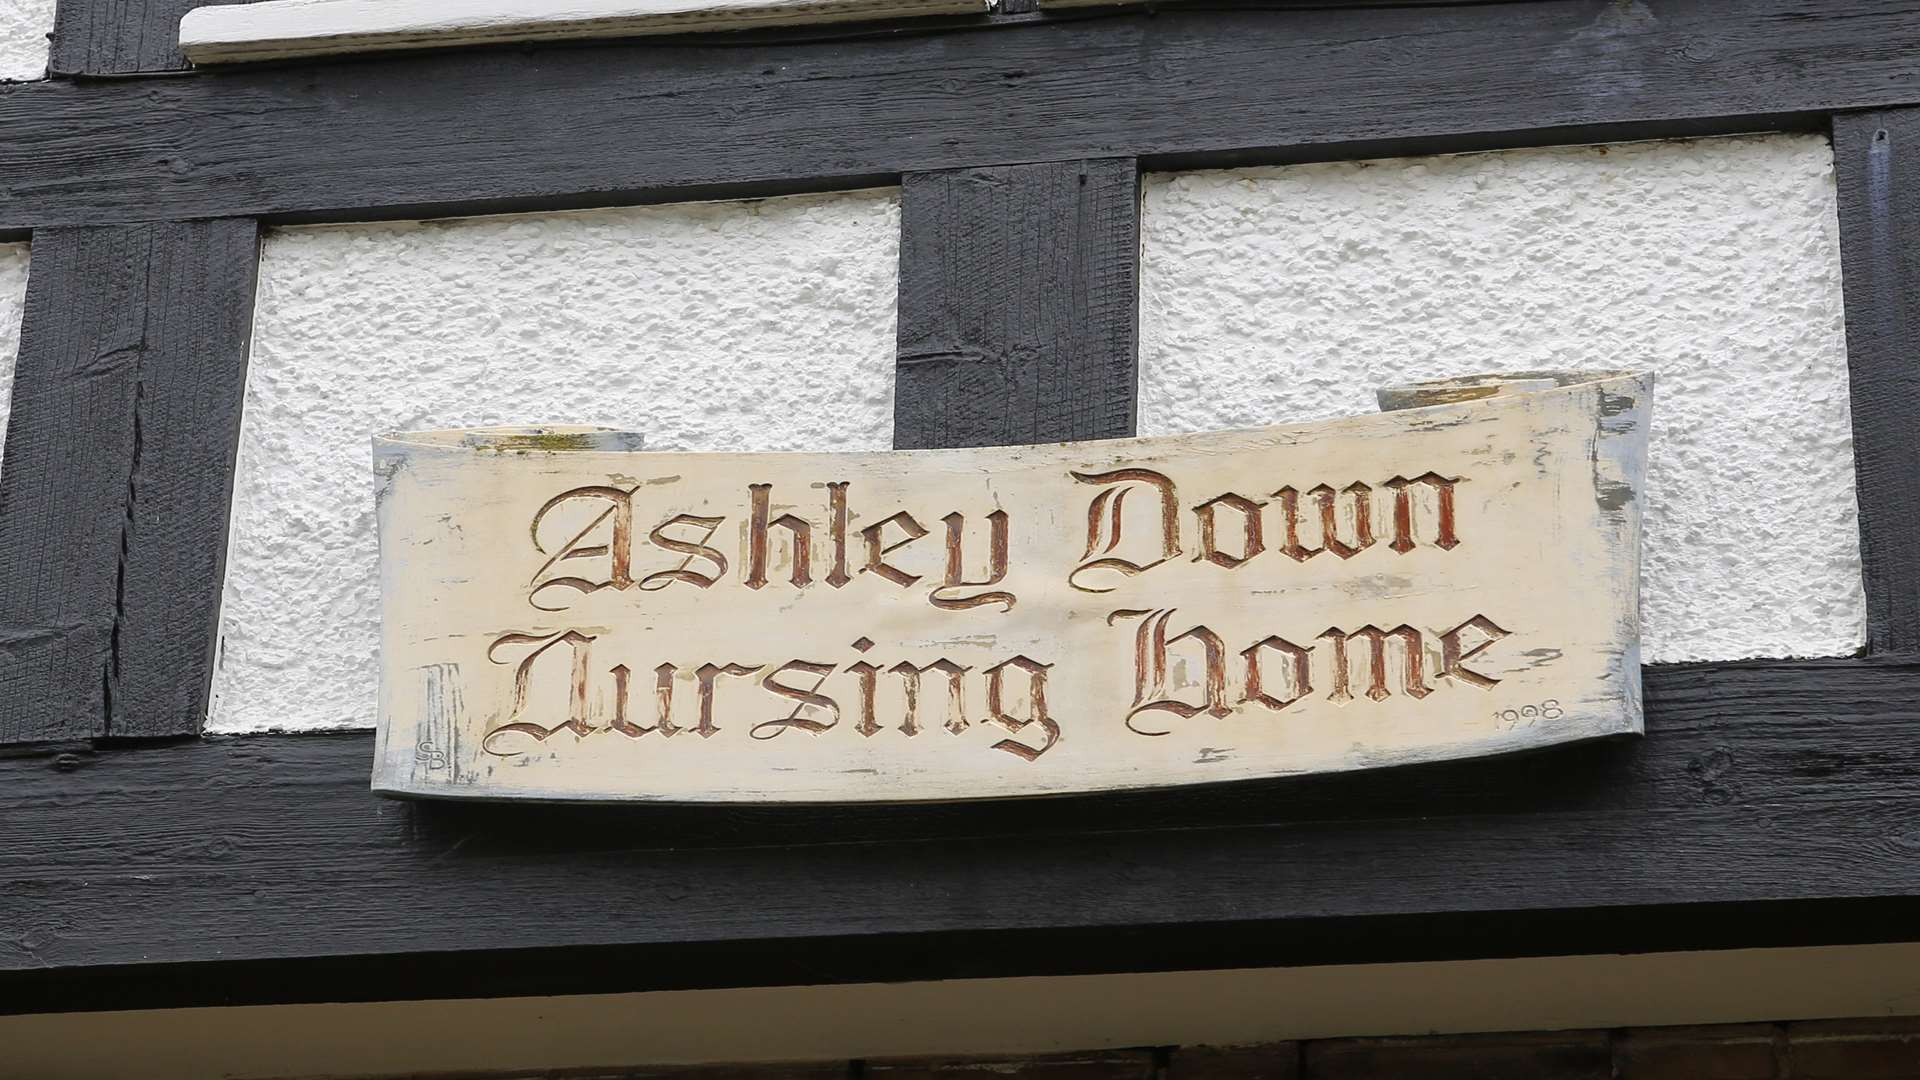 A view of Ashley Down Nursing Home in Gravesend